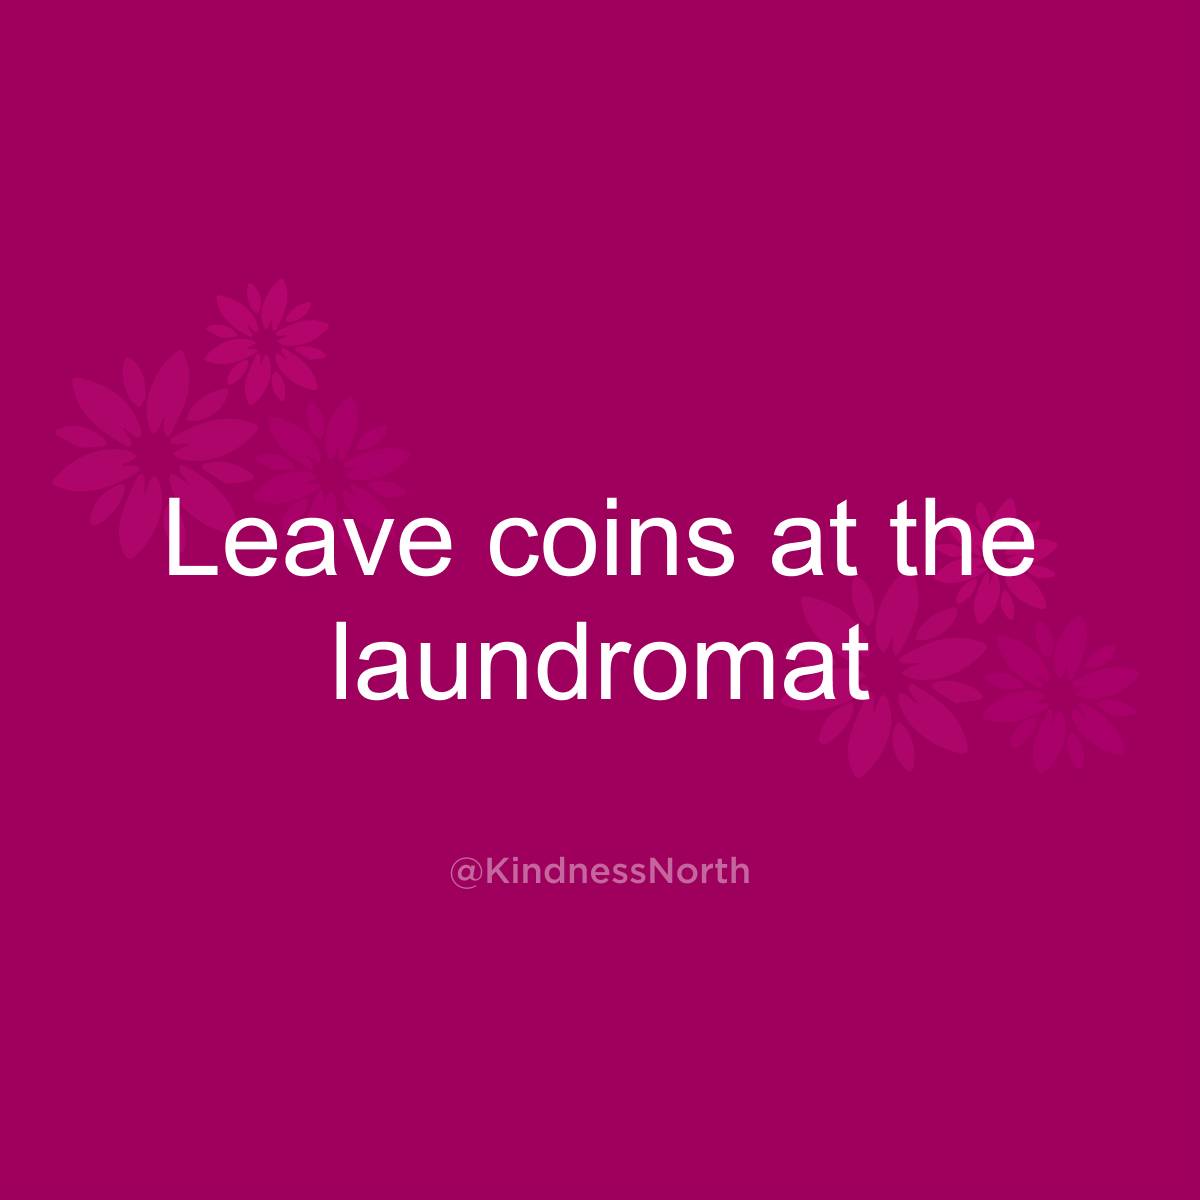 Leave coins at the laundromat